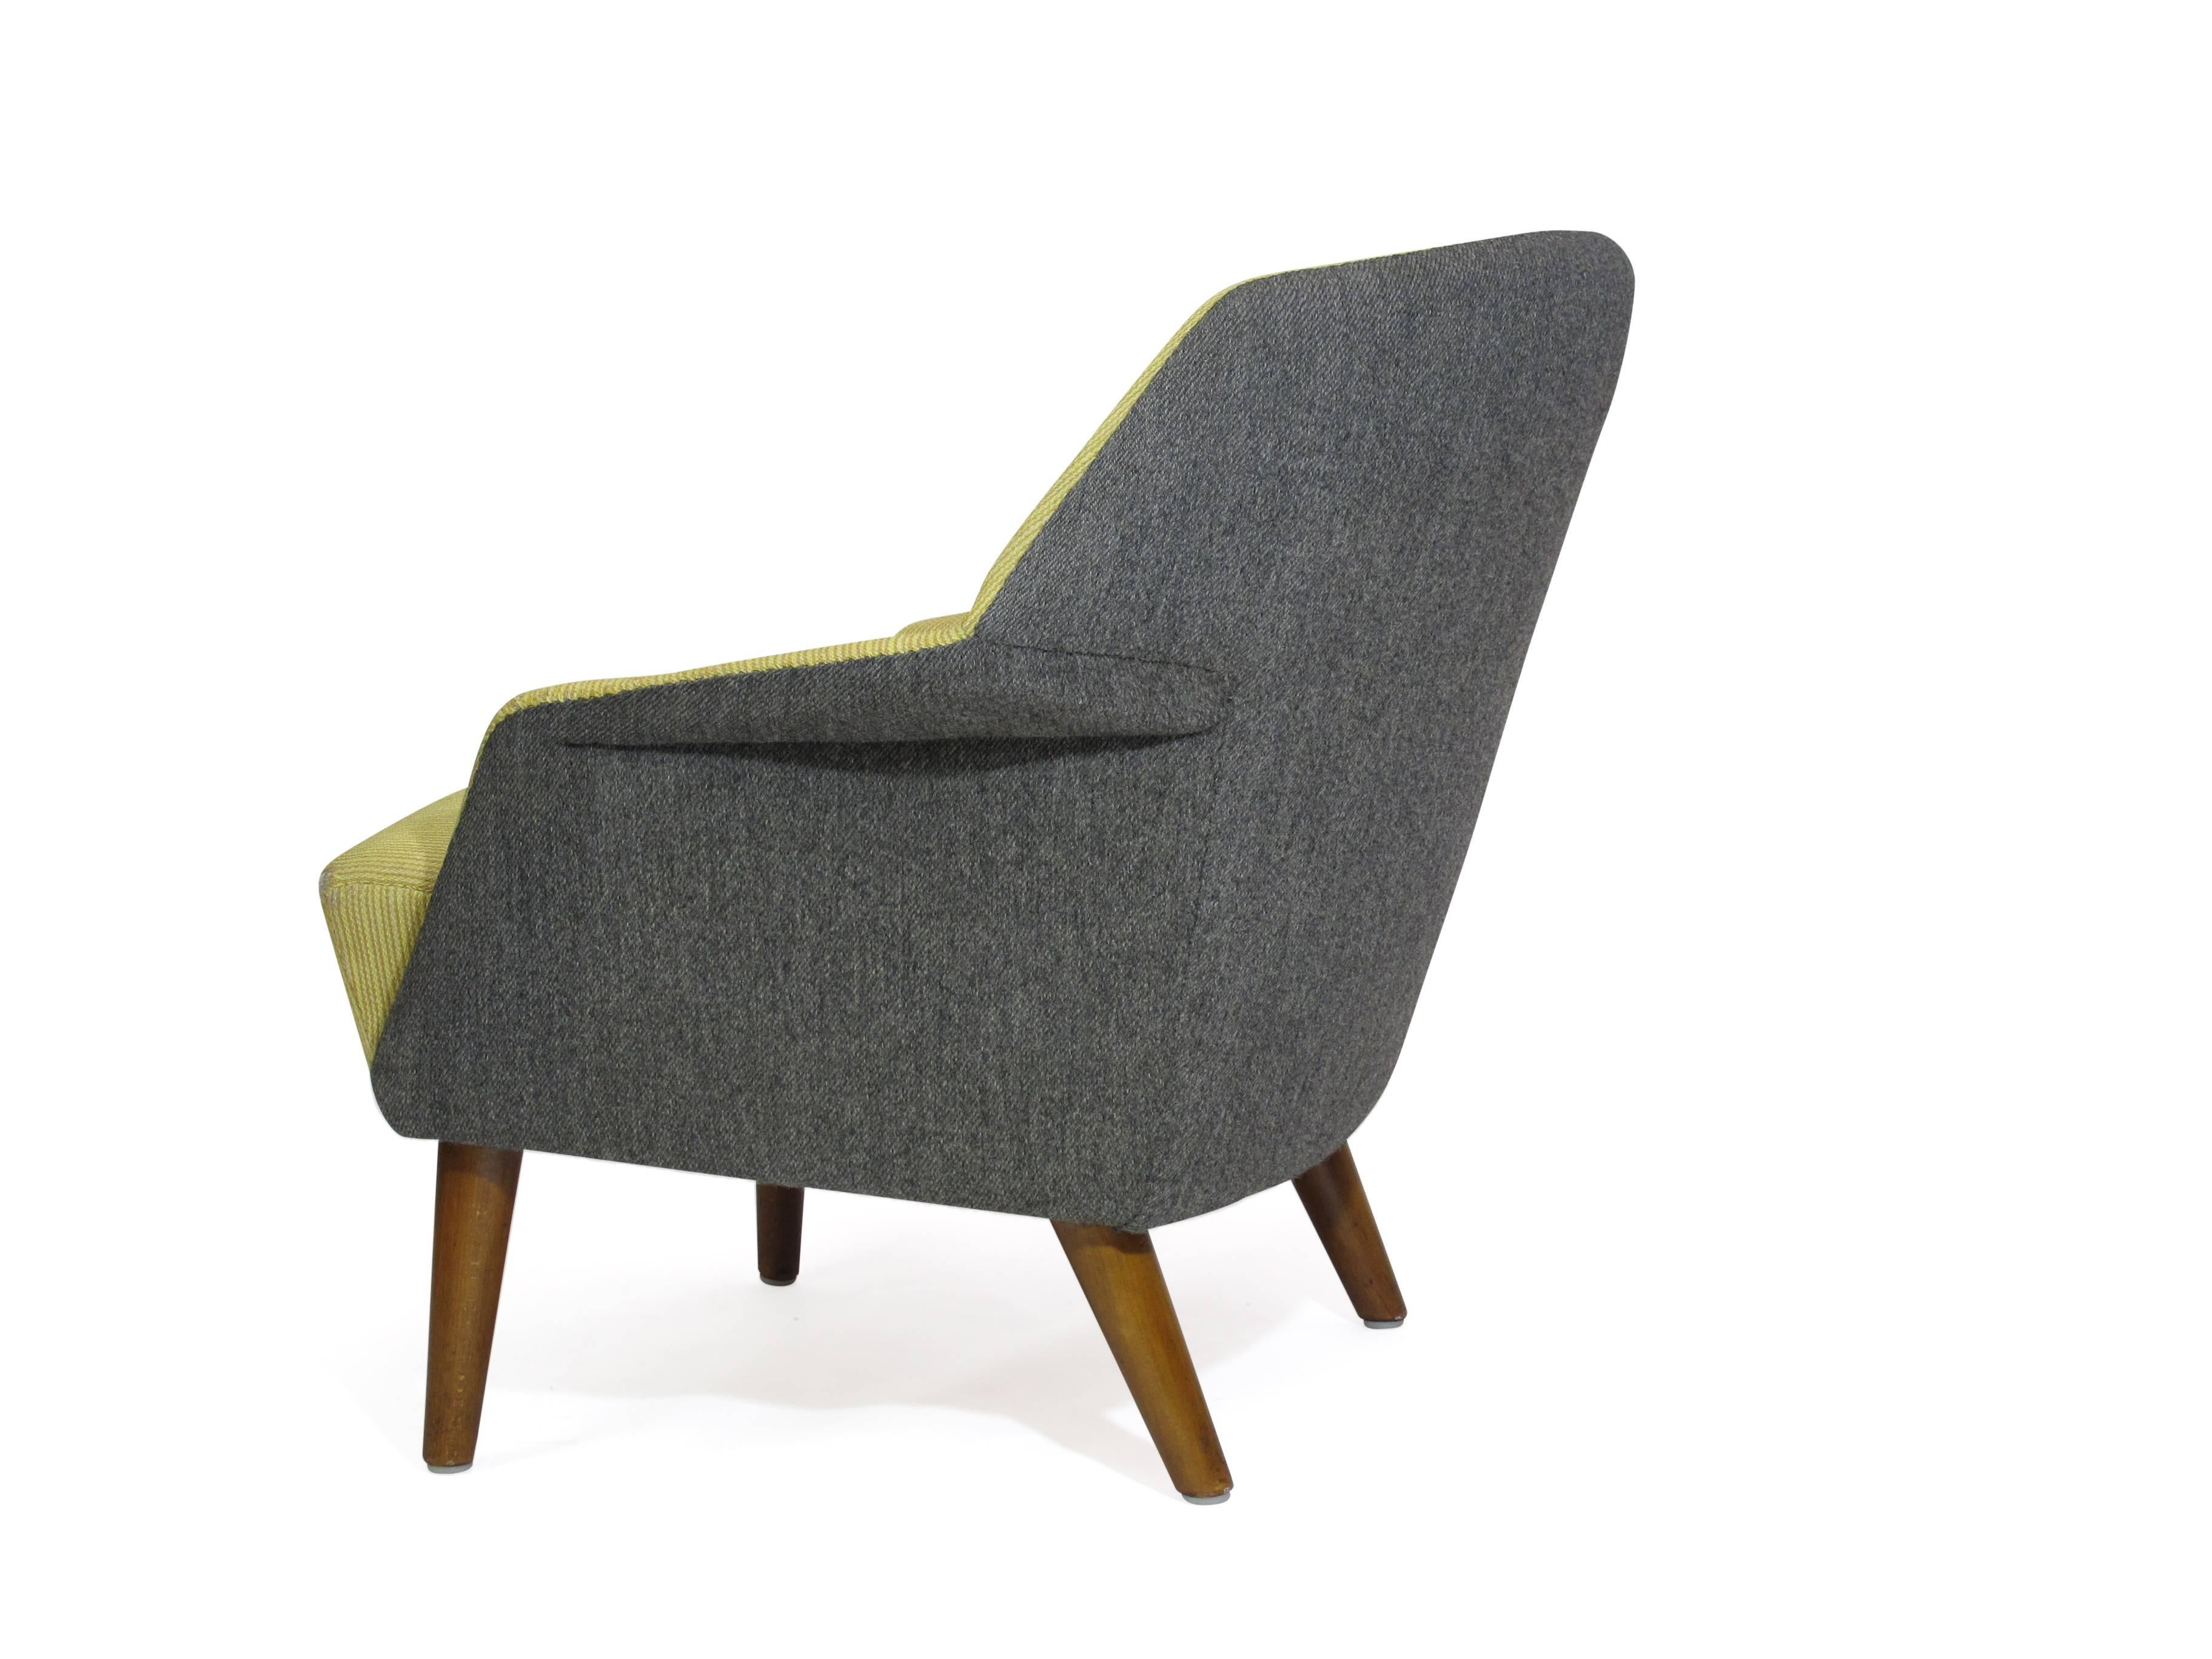 Wool Aksel Bender Madsen Danish Lounge Chair for Reupholstery